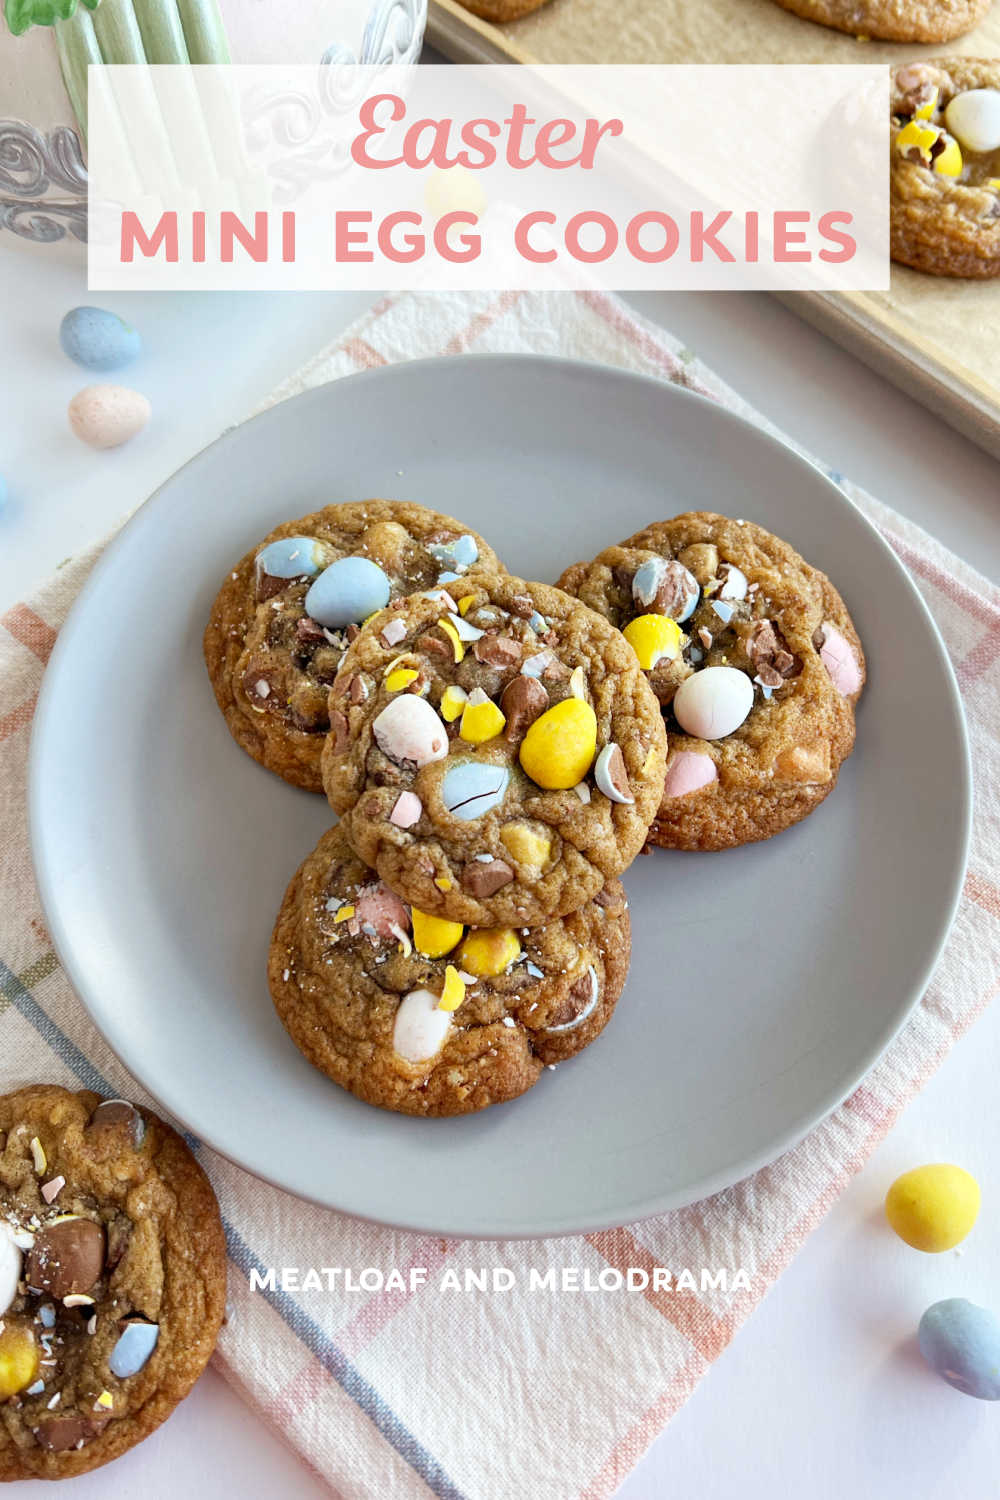 Mini Egg Cookies are chocolate chip cookies with Cadbury mini eggs. These cute Easter cookies are a great addition to your Easter desserts menu and an easy treat the whole family will love! via @meamel